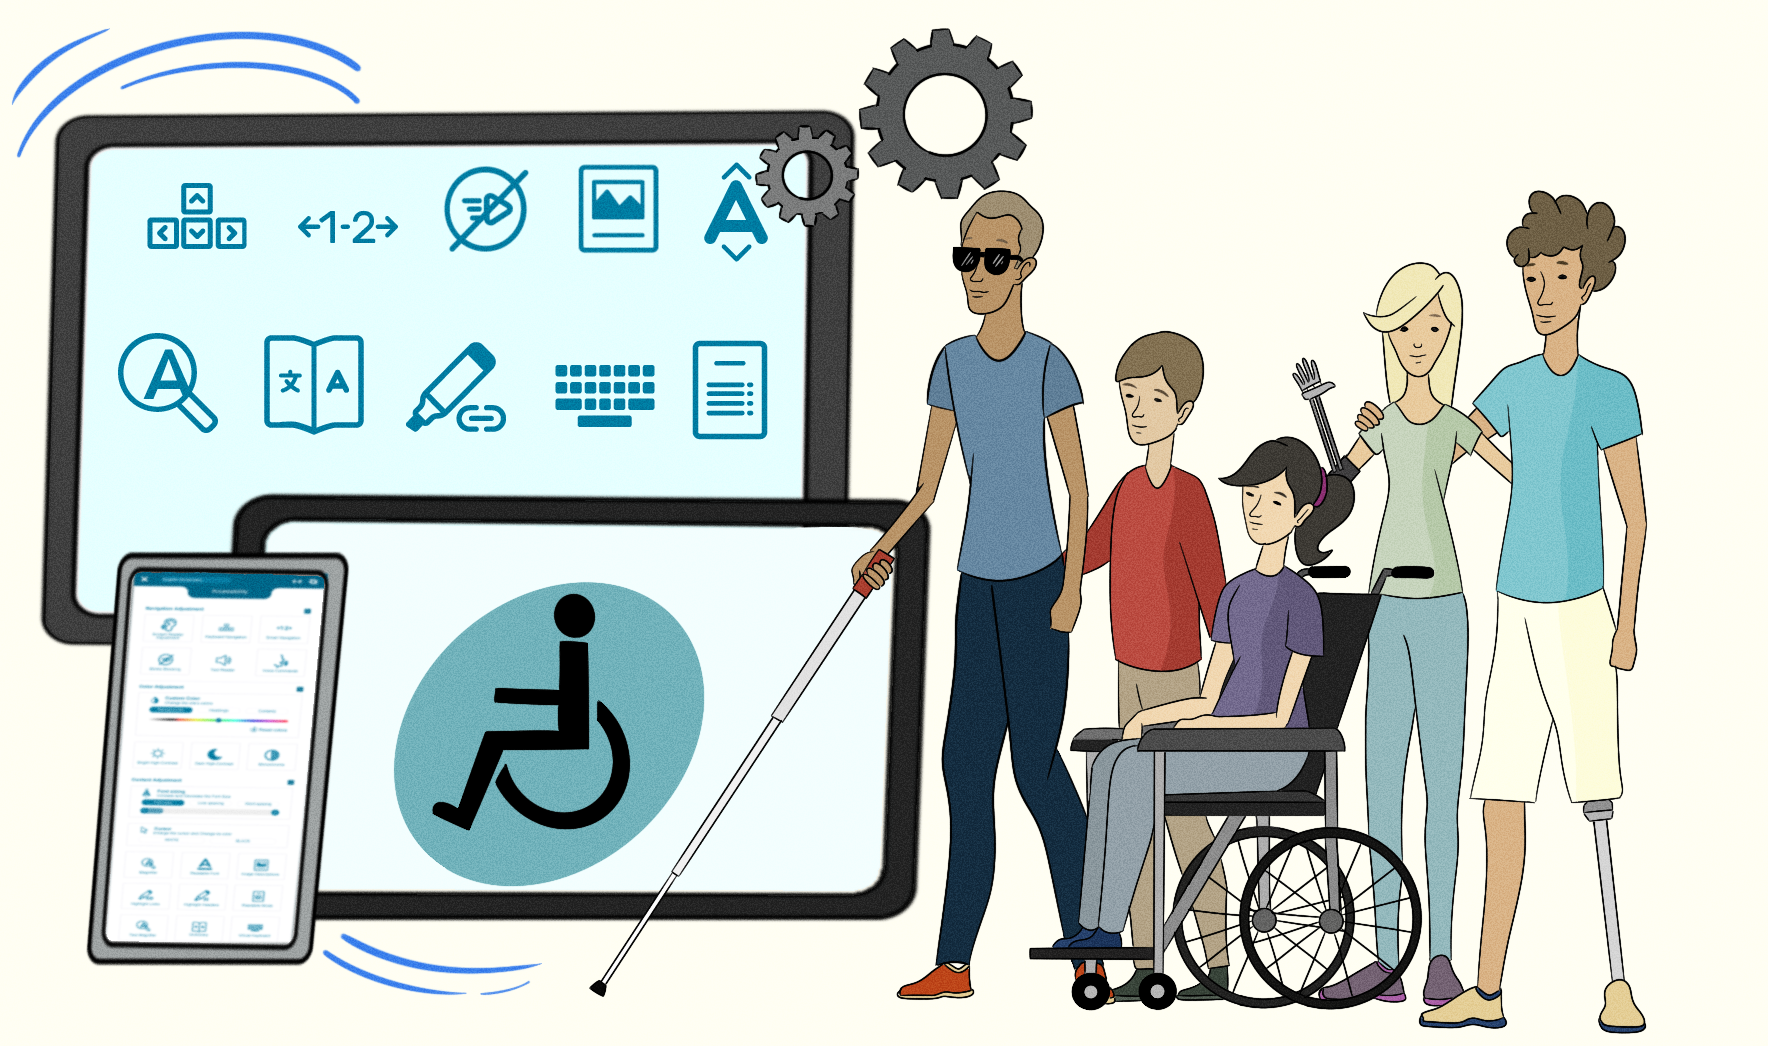 Drawing of people with disabilities alongside digital devices